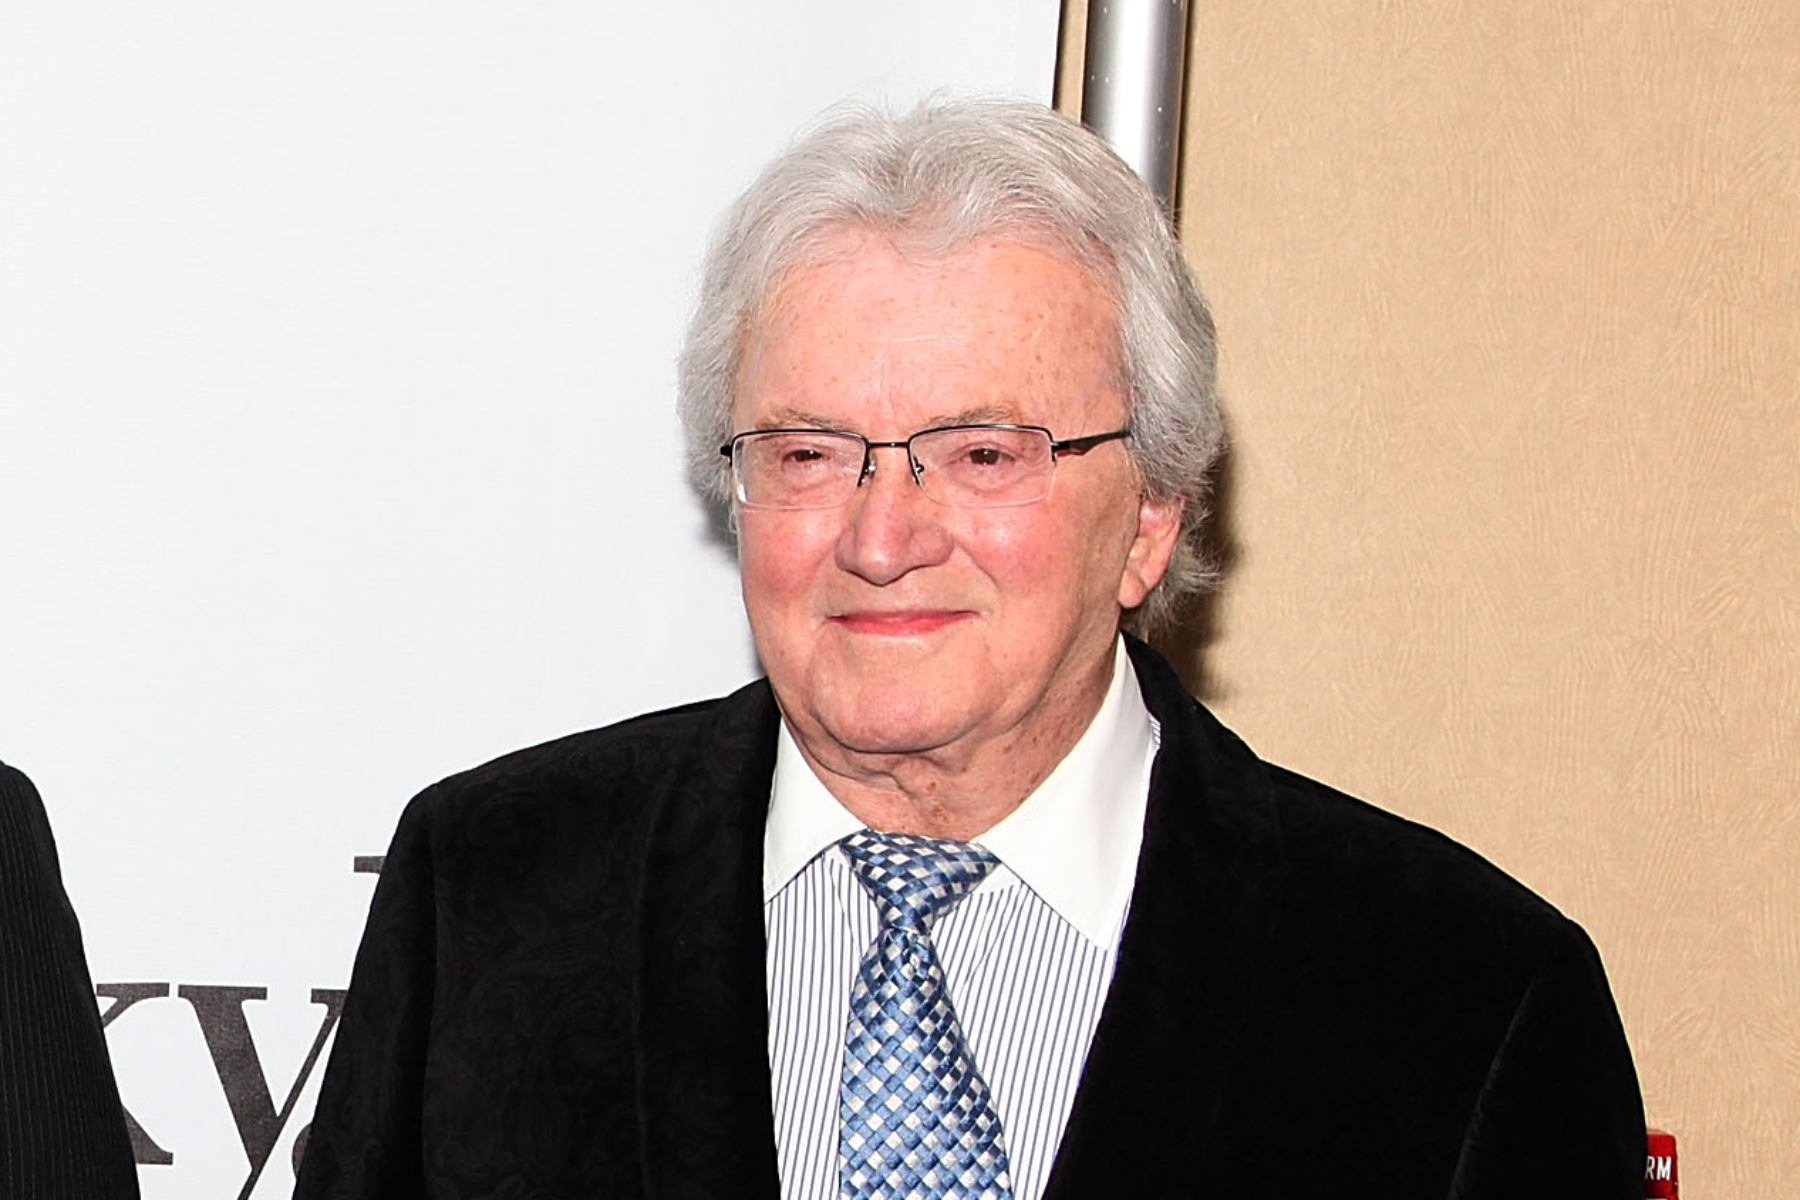 Leslie Bricusse, 'Willy Wonka, 'Goldfinger' Songwriter, Dead at 90